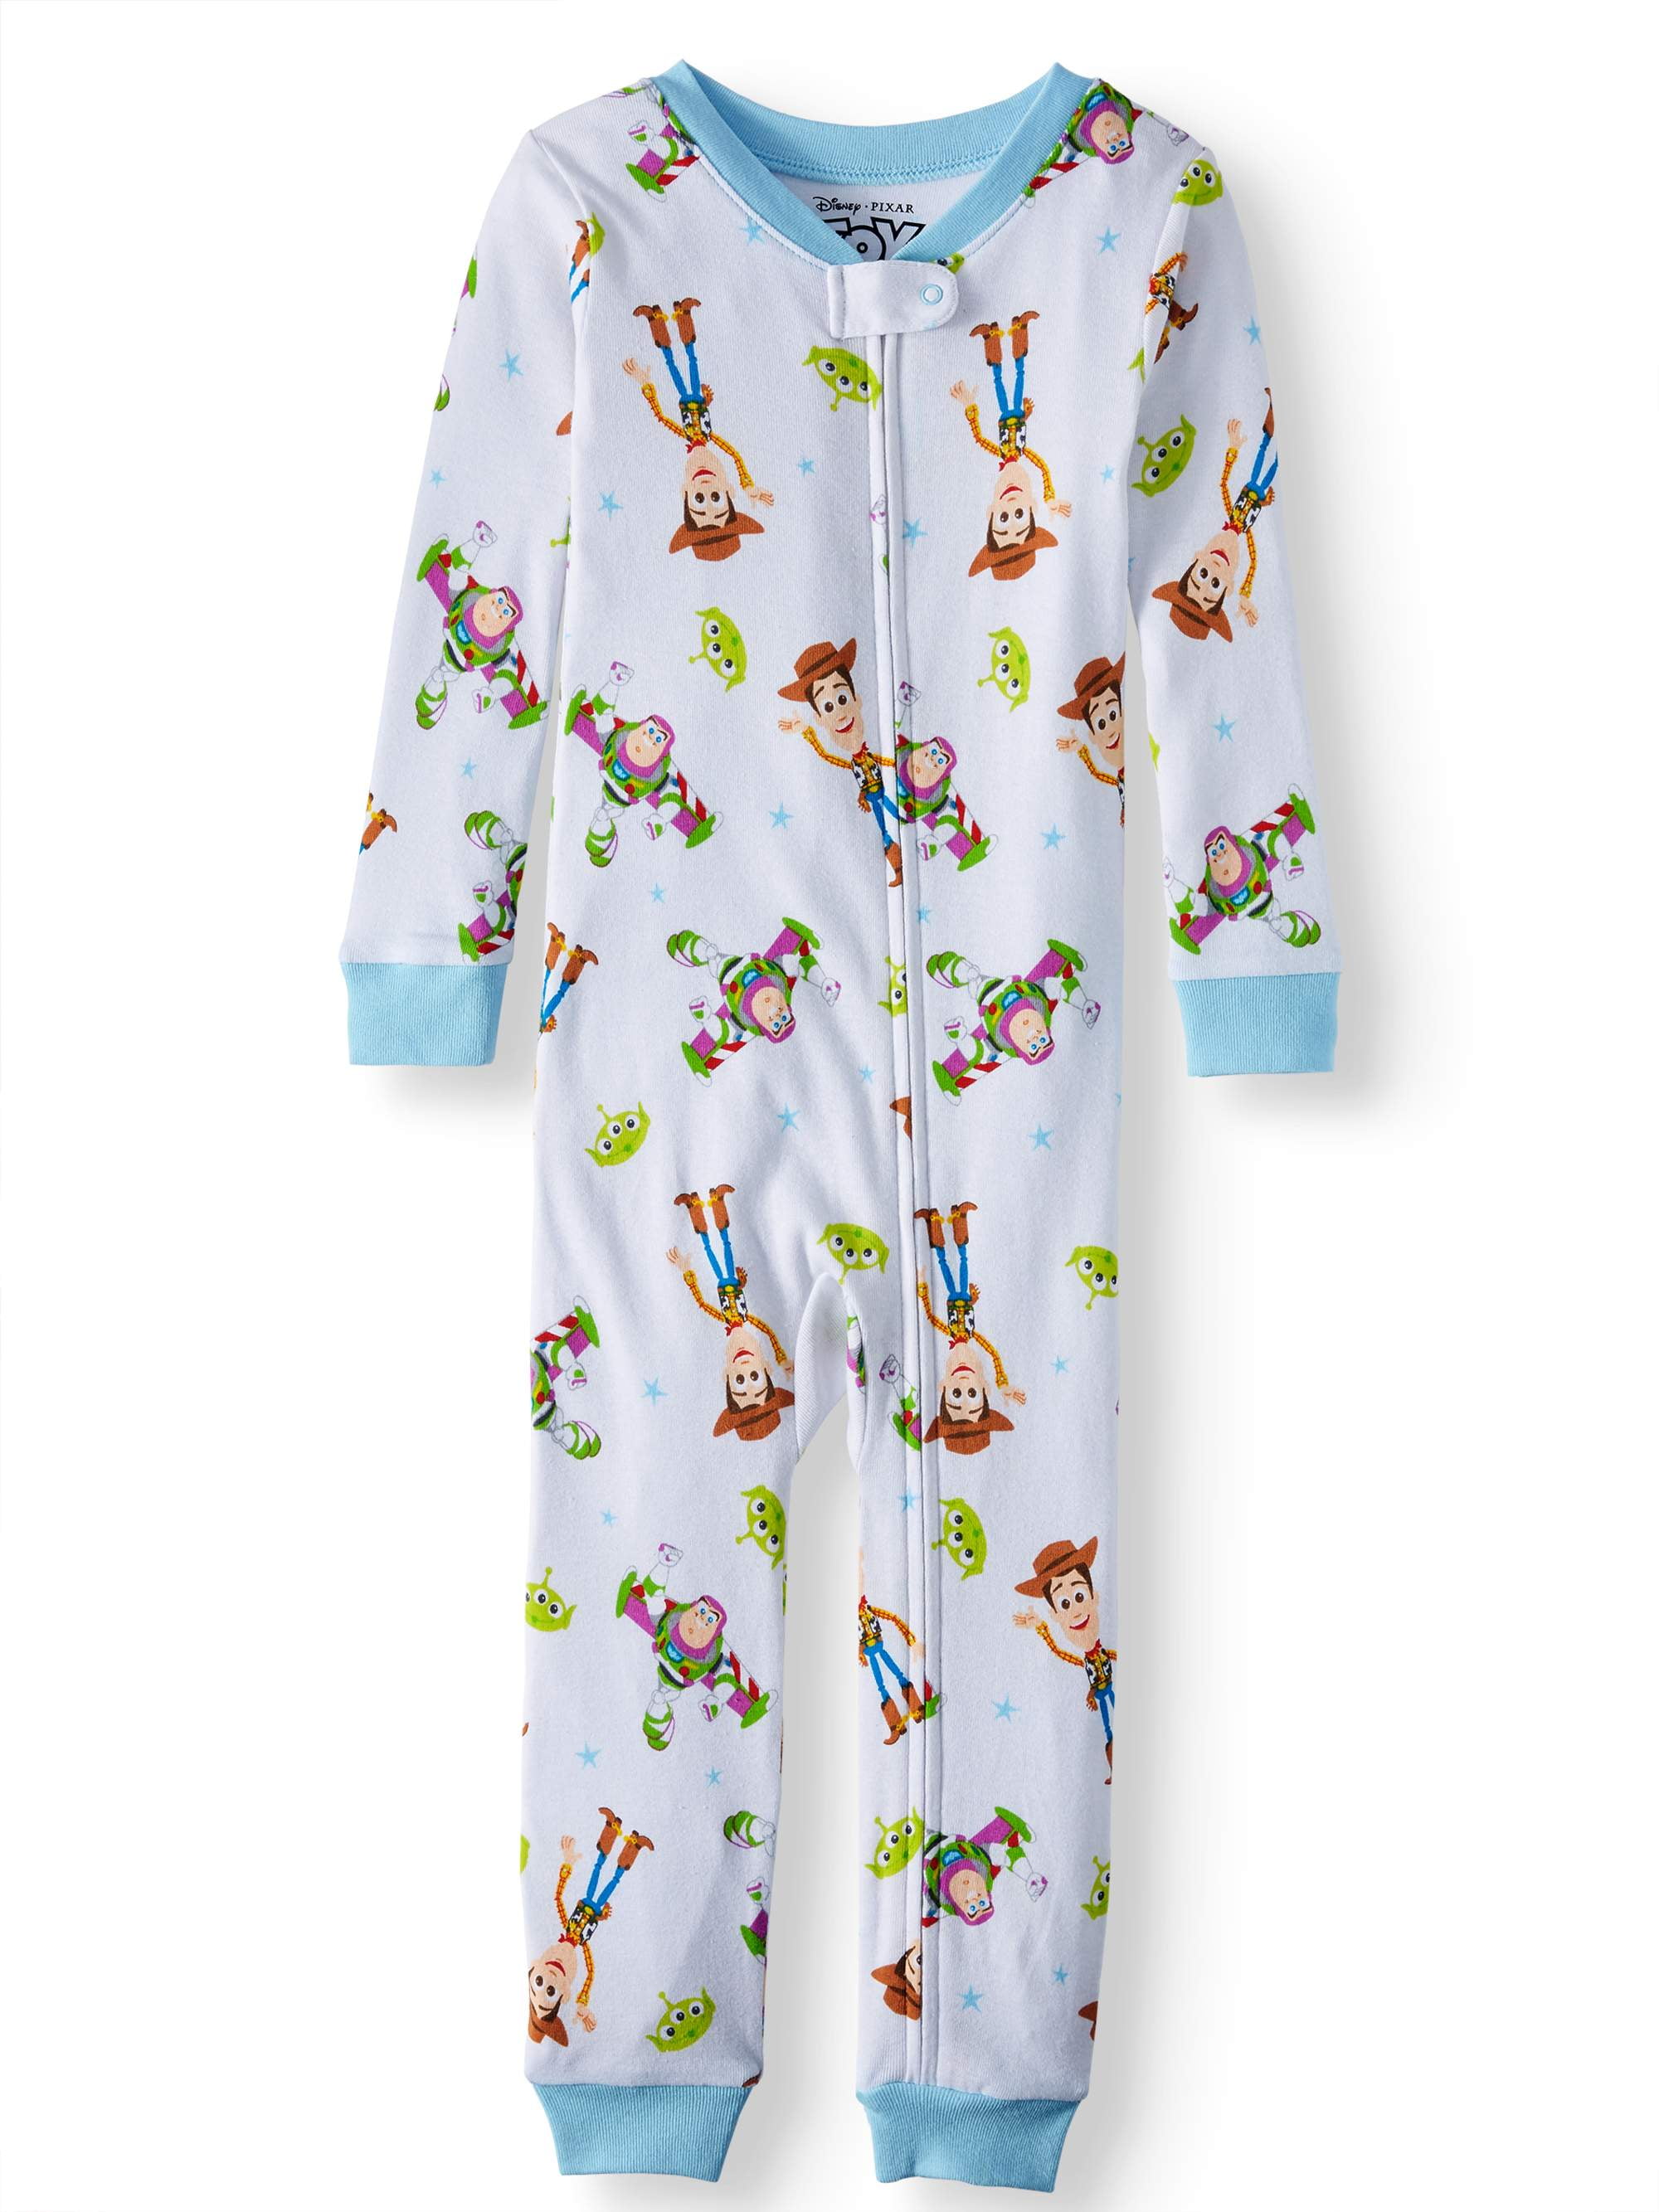 Disney Store Woody Stretchie Footed Costume Pajamas Infant Toy Story Movie pjs